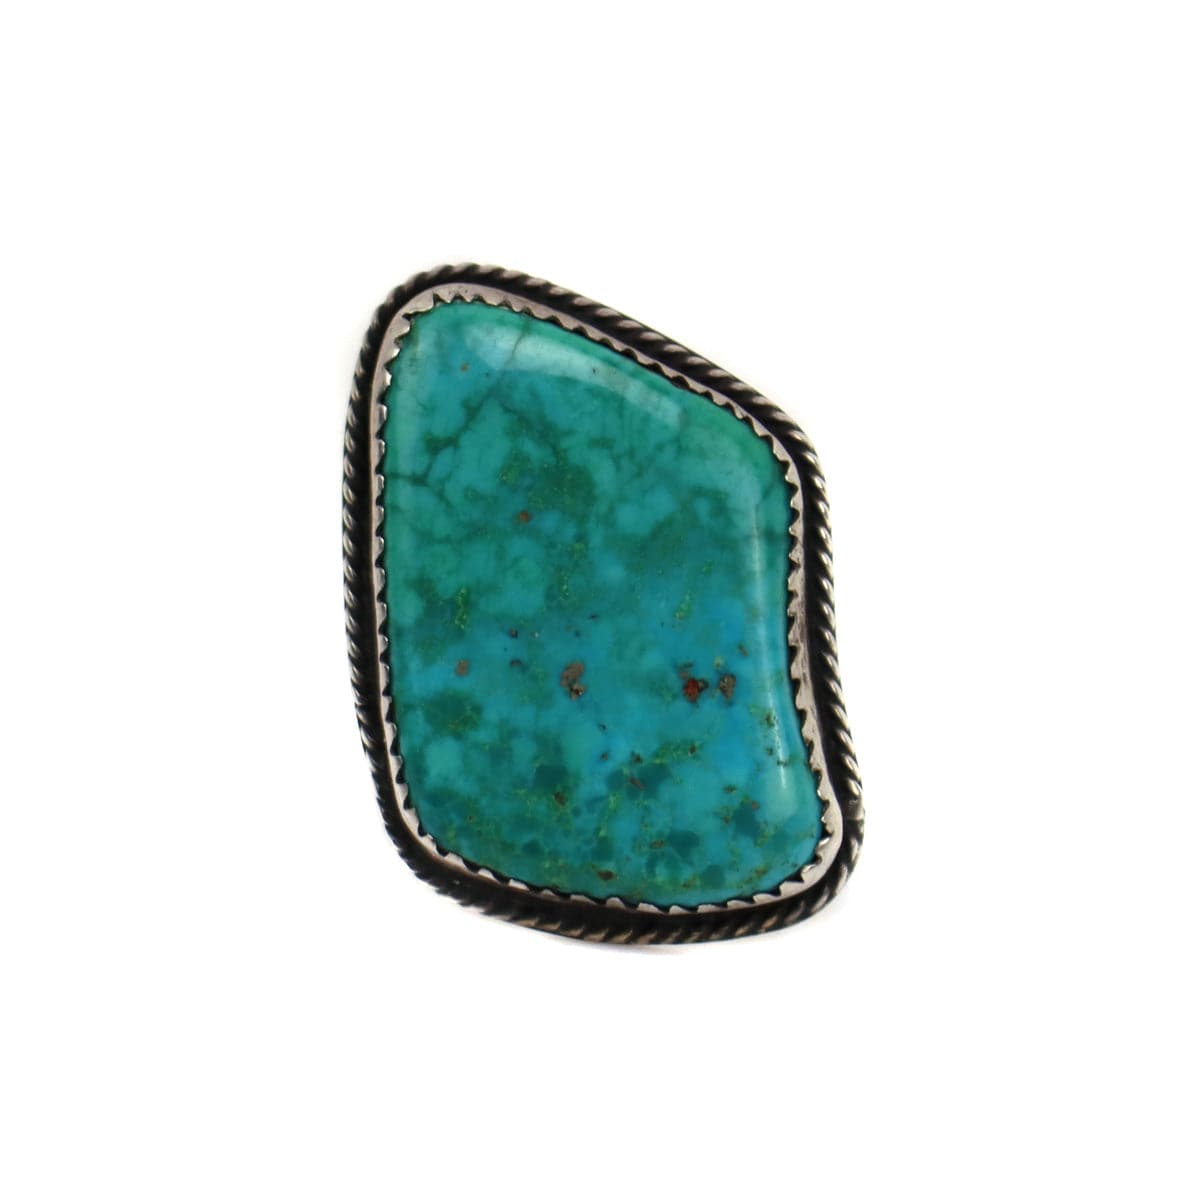 Mark Chee (1914-1981) - Navajo Blue Gem Turquoise and Silver Ring c. 1950s, Size 10.5 (J15057)